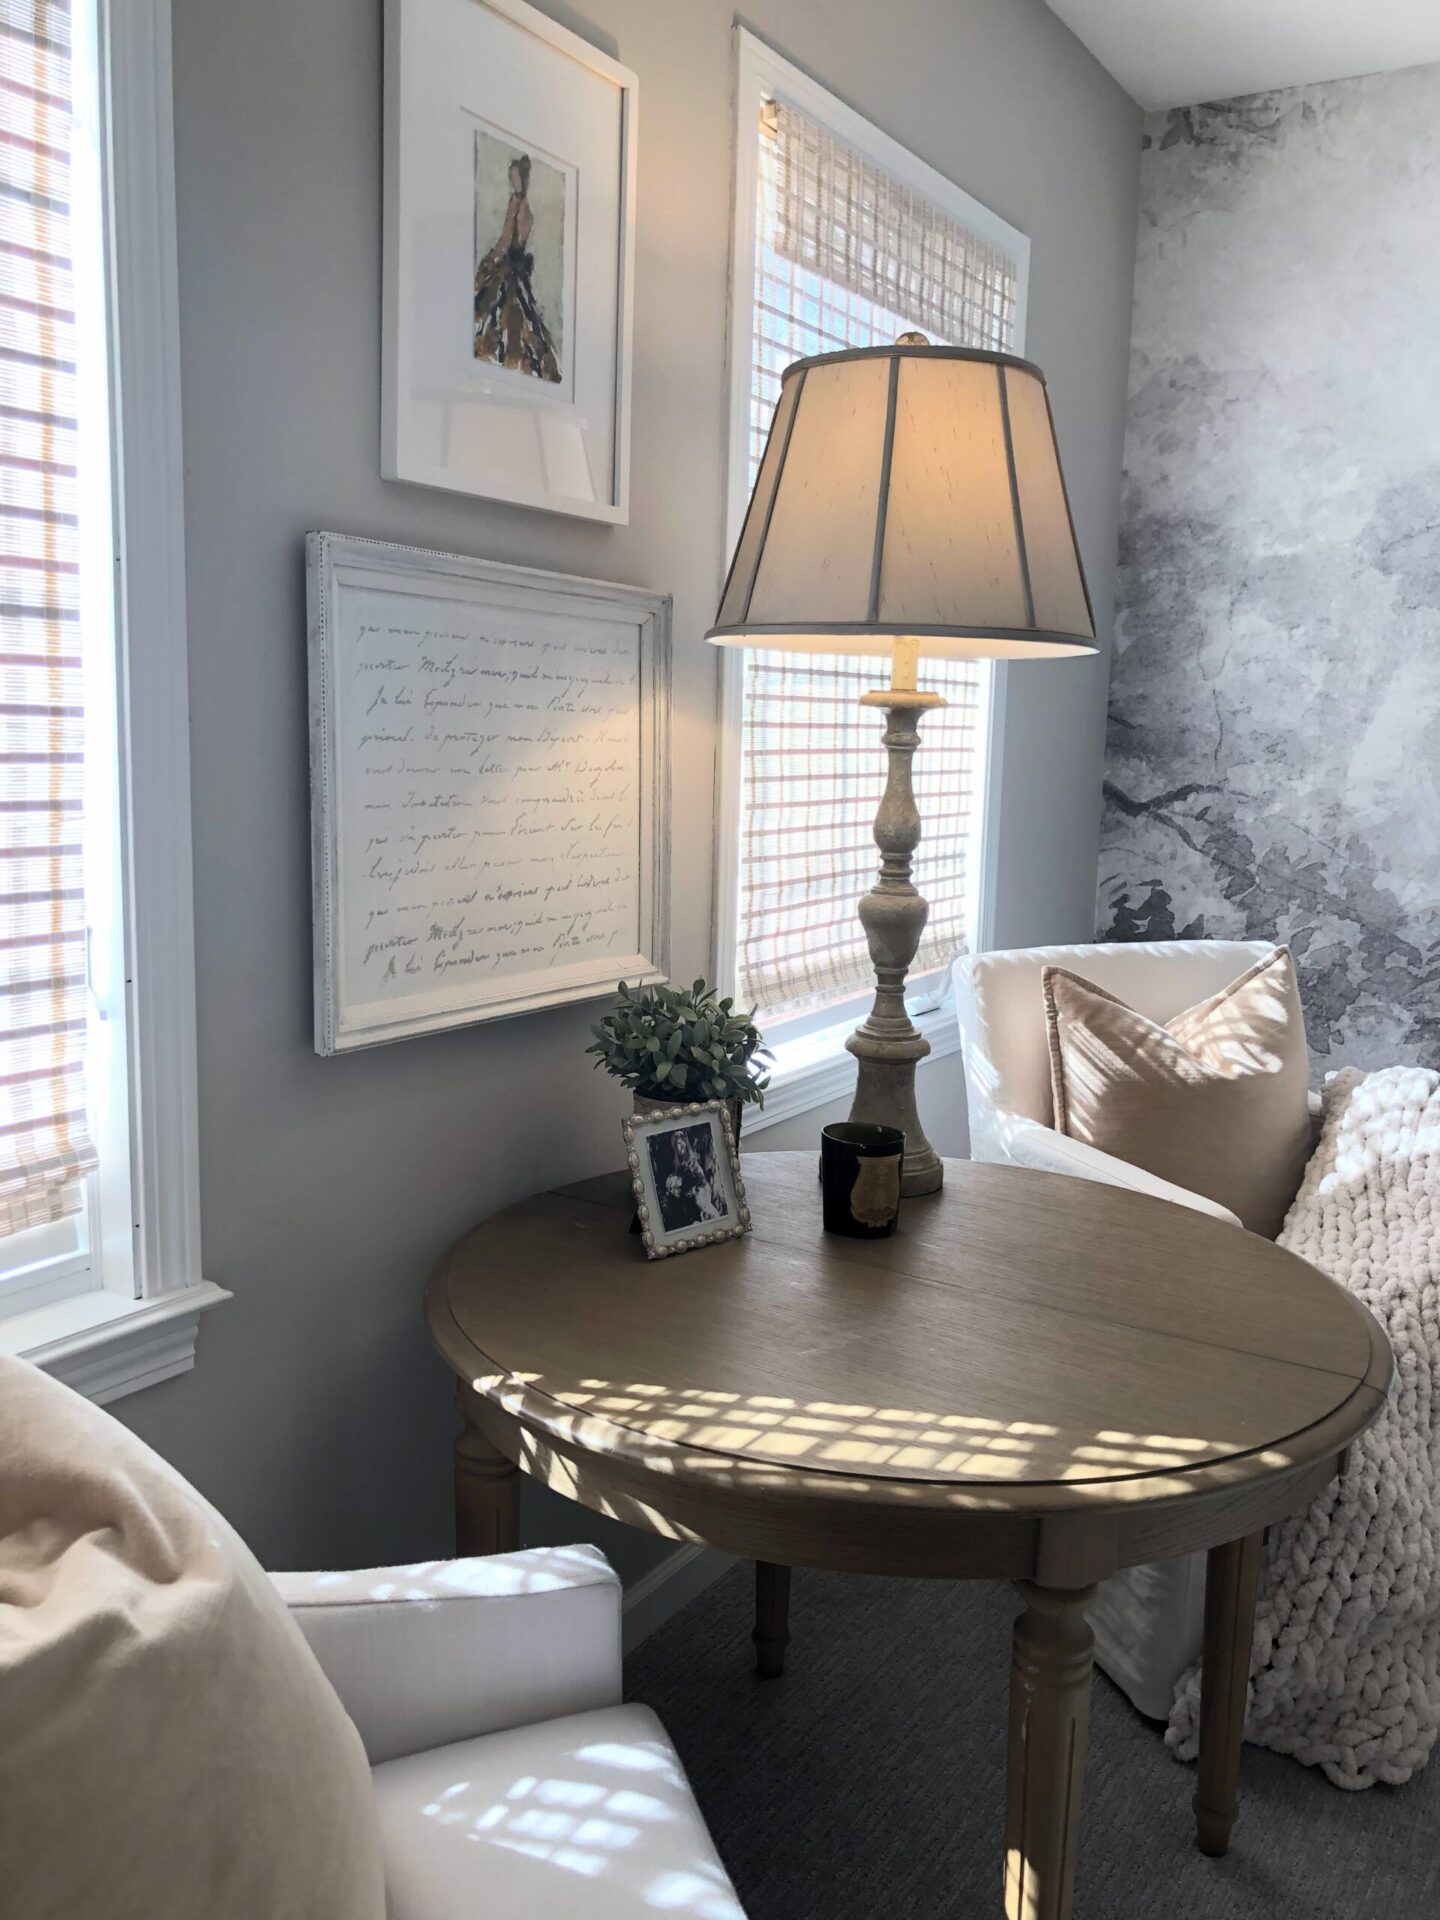 Holly Irwin art in serene bedroom with Belgian style and SW Agreeable Gray Walls - Hello Lovely. #agreeablegray